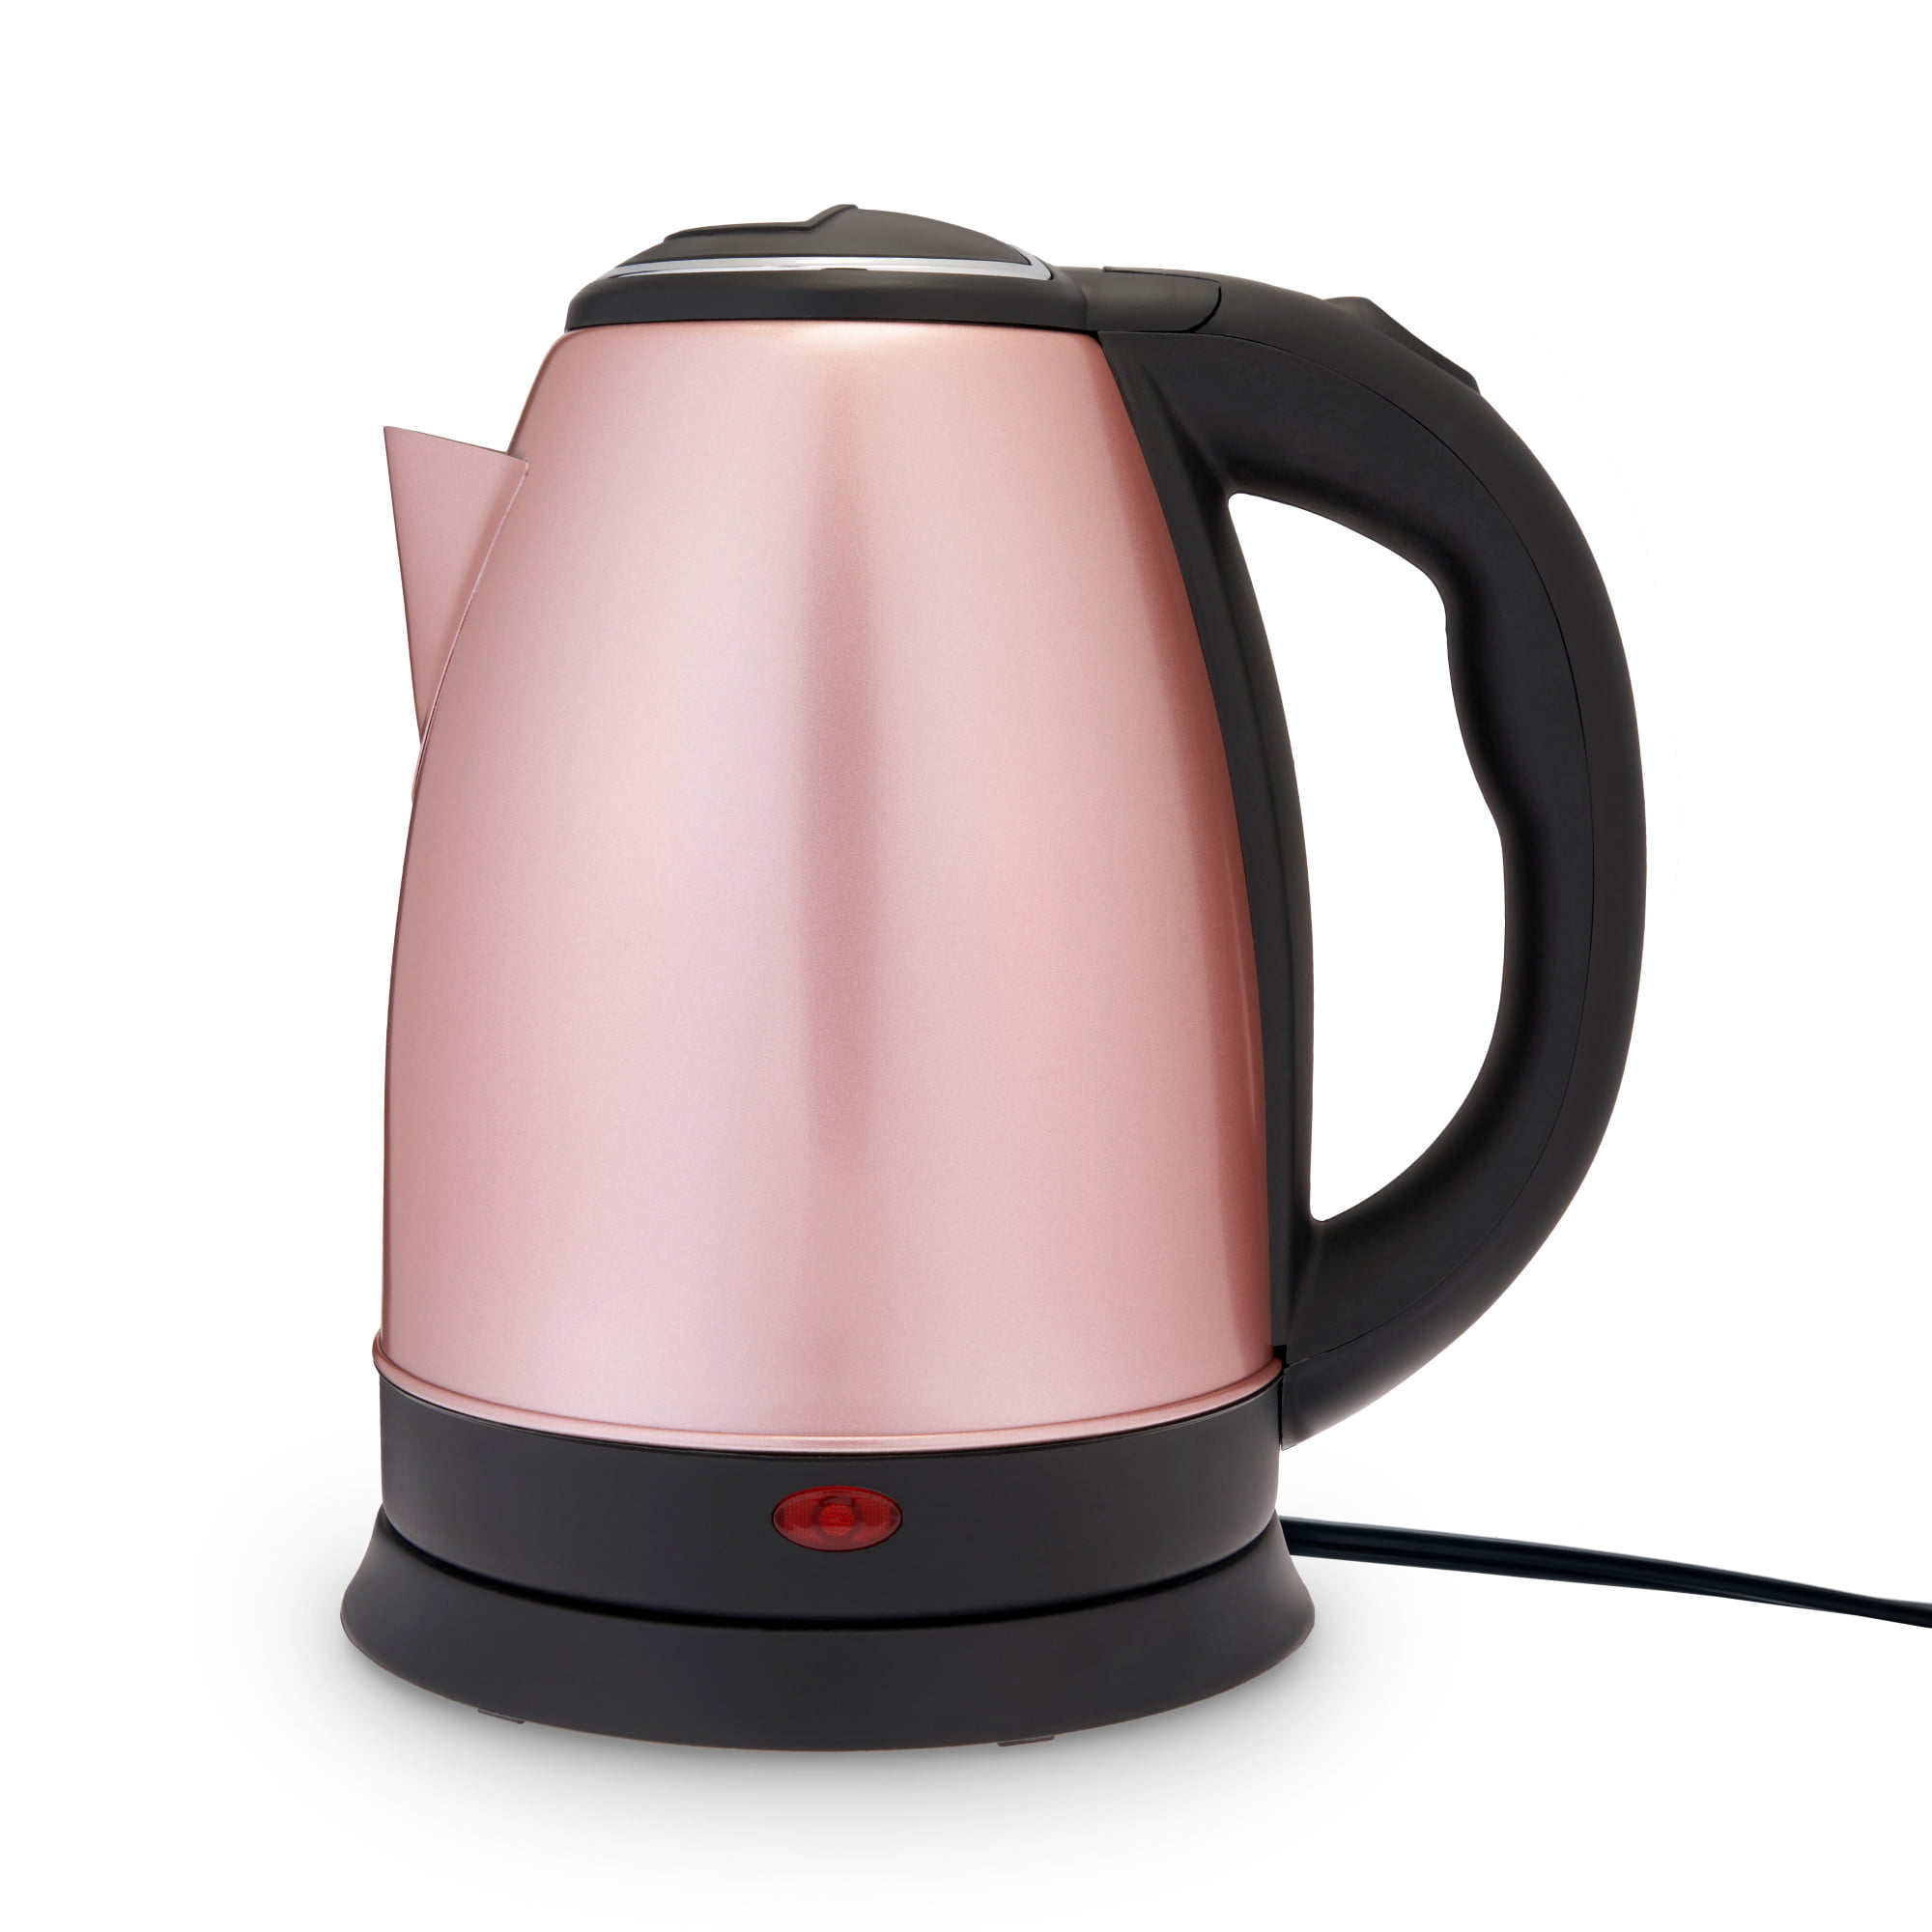  Electric Kettle, Hot Tea Maker, Electric Glass Kettle - Electric  Kettles for Boiling Water for 1.8 L, Temperature Control Electric Kettle  with Tea Infuse, with 24 Smart Menu (Color : Pink